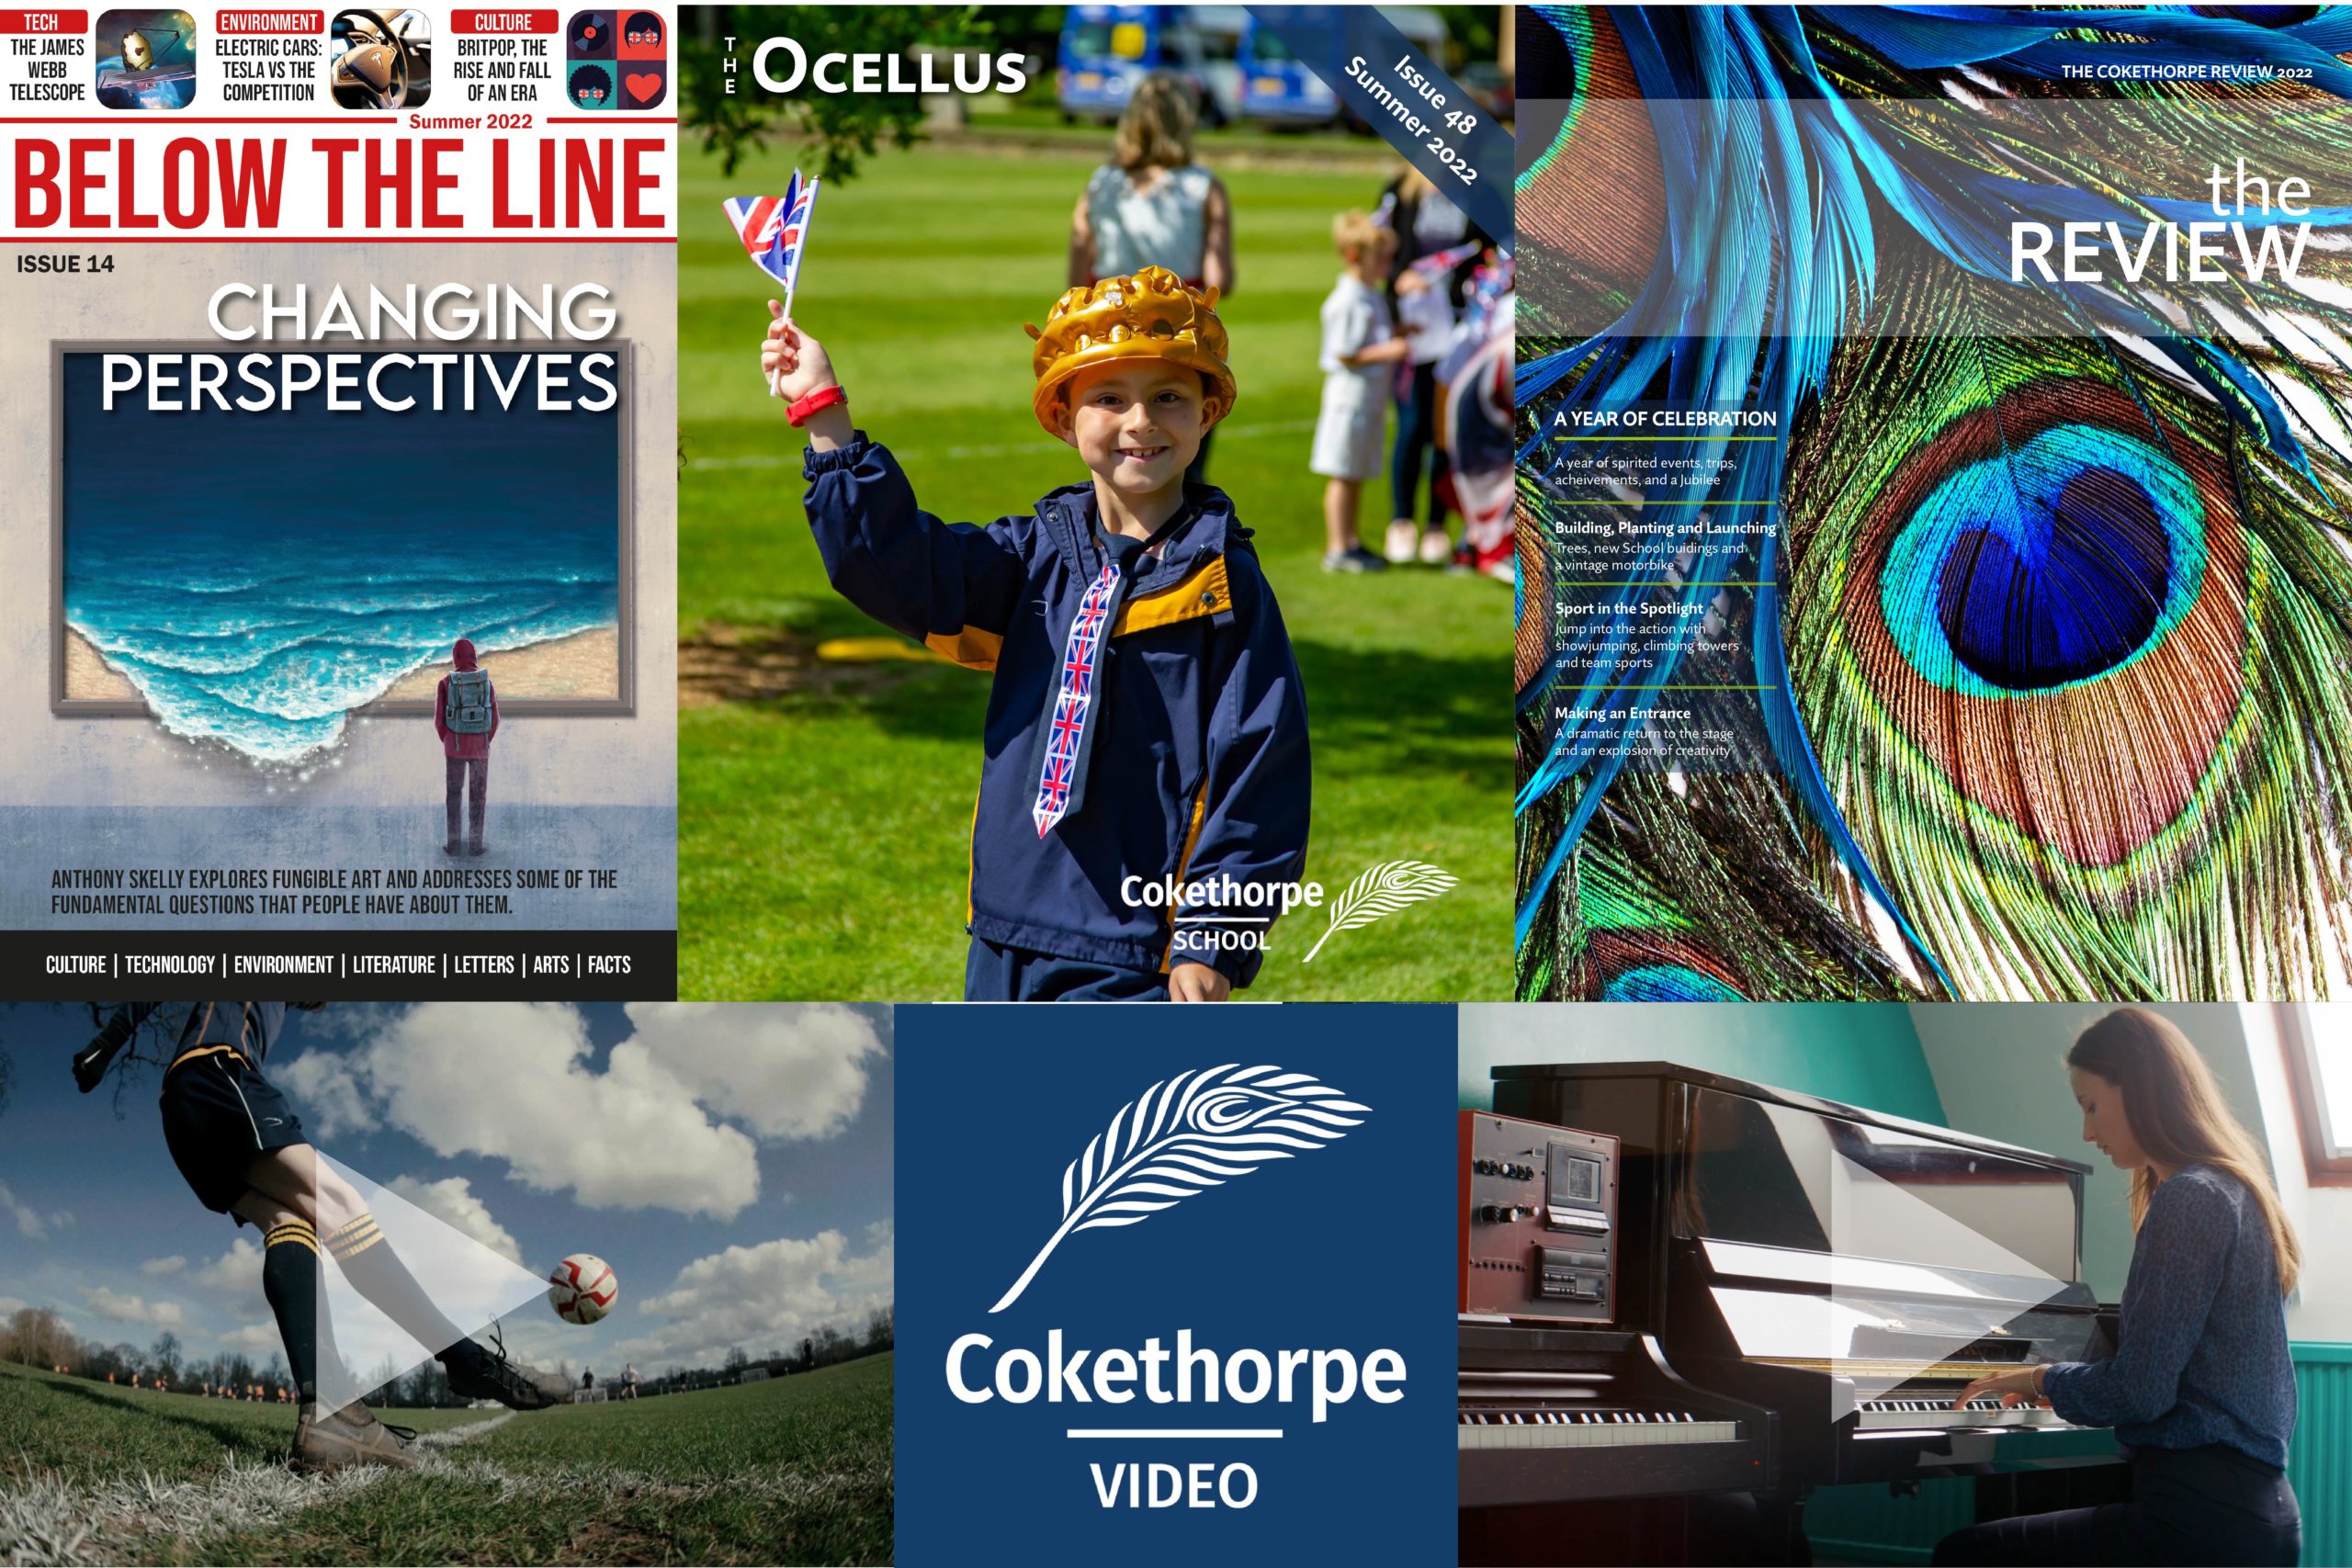 Cokethorpe publications and films-where next-02 - An independent day school